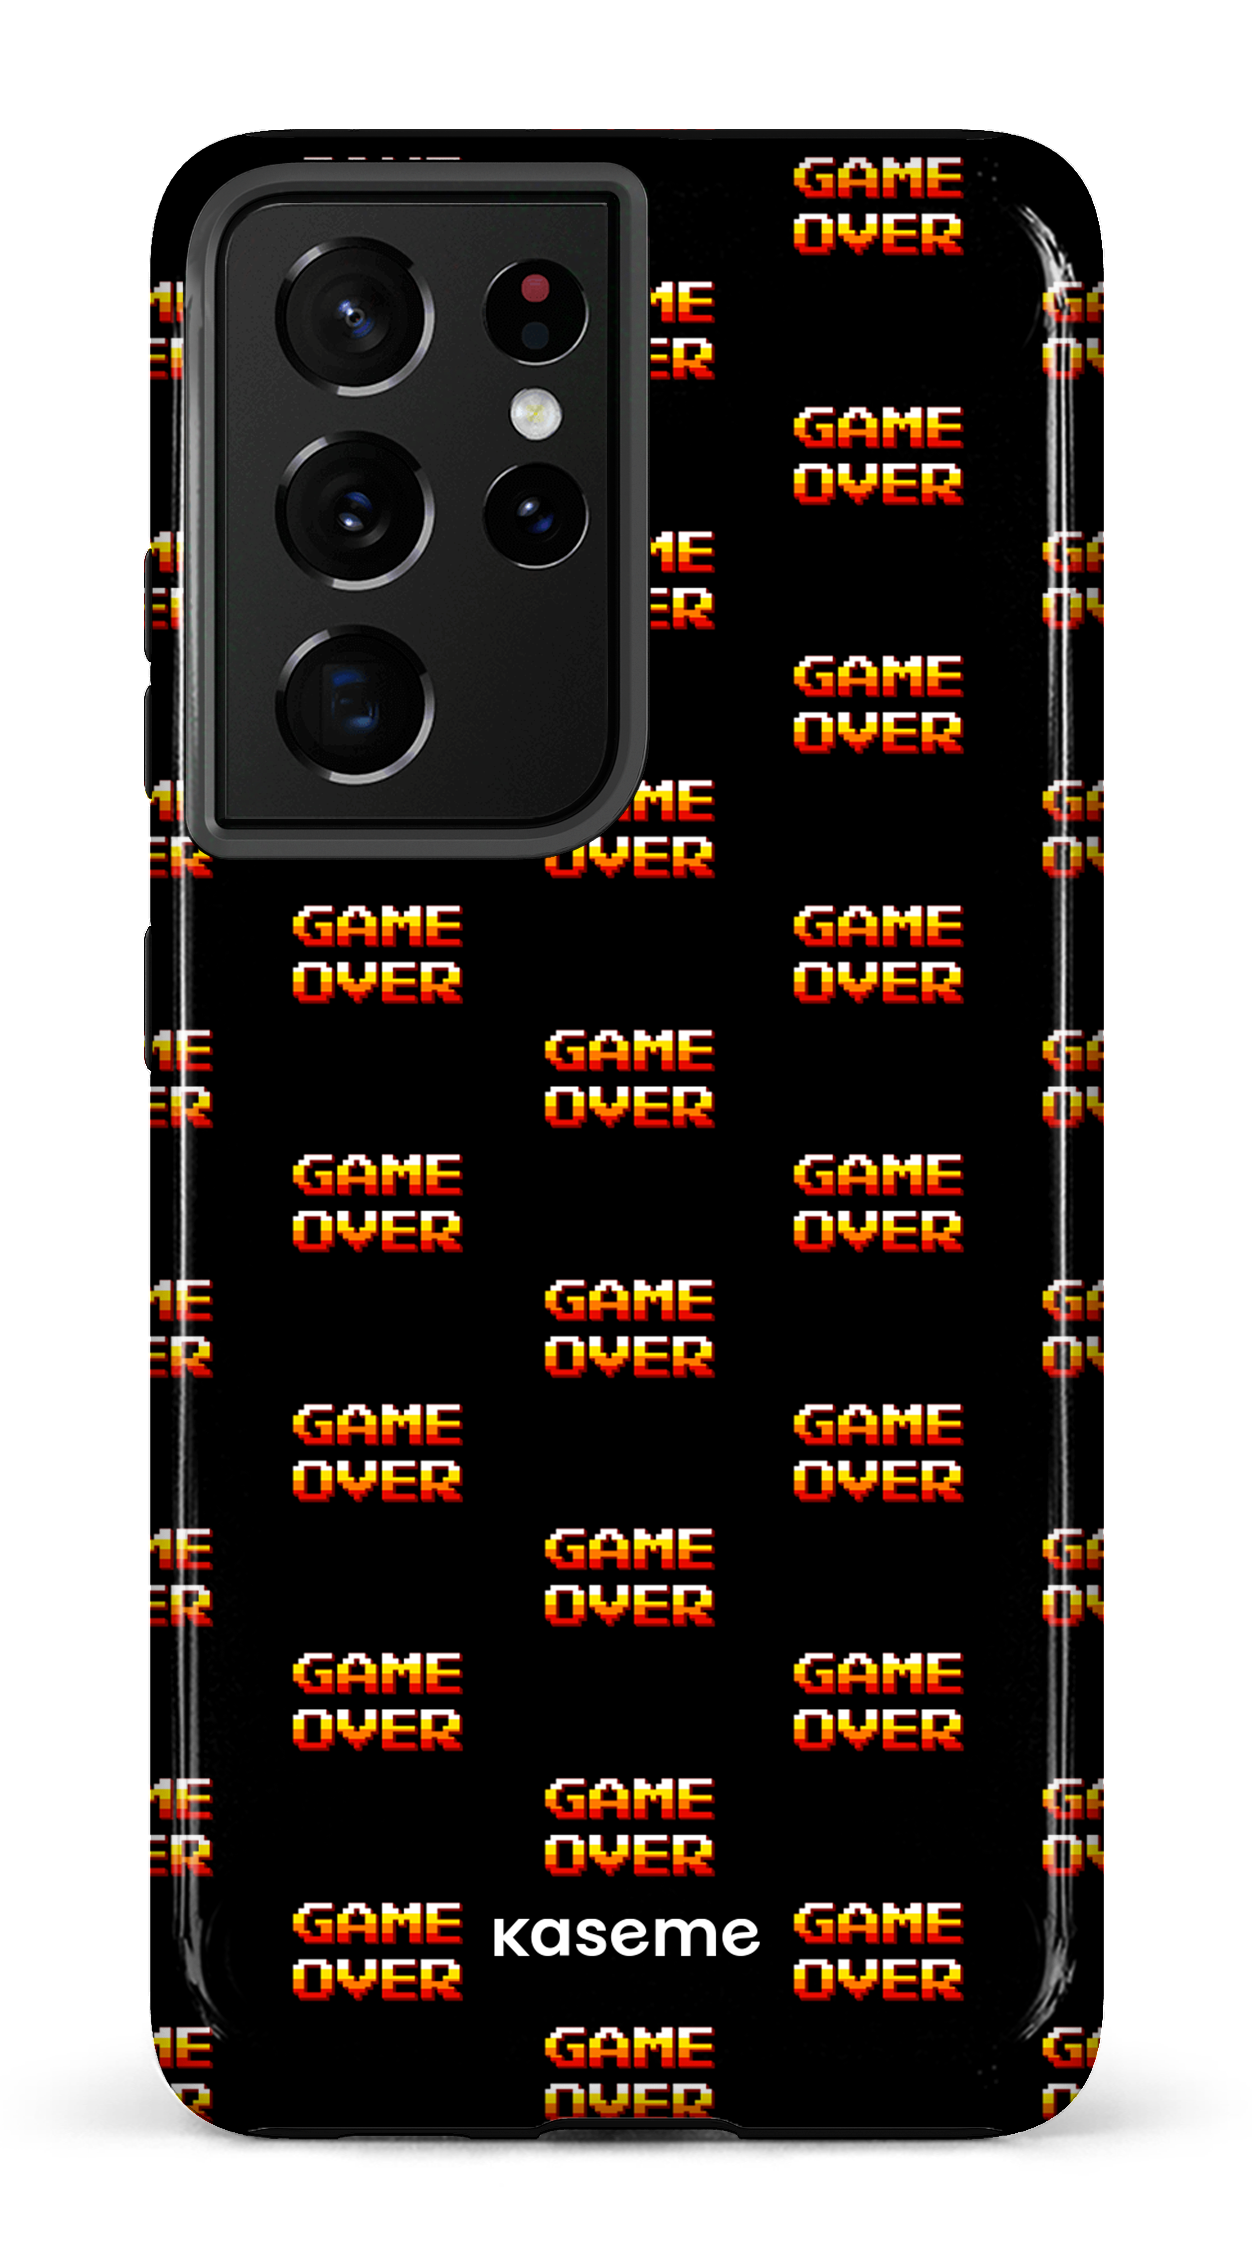 Game Over by Mathieu Pellerin - Galaxy S21 Ultra